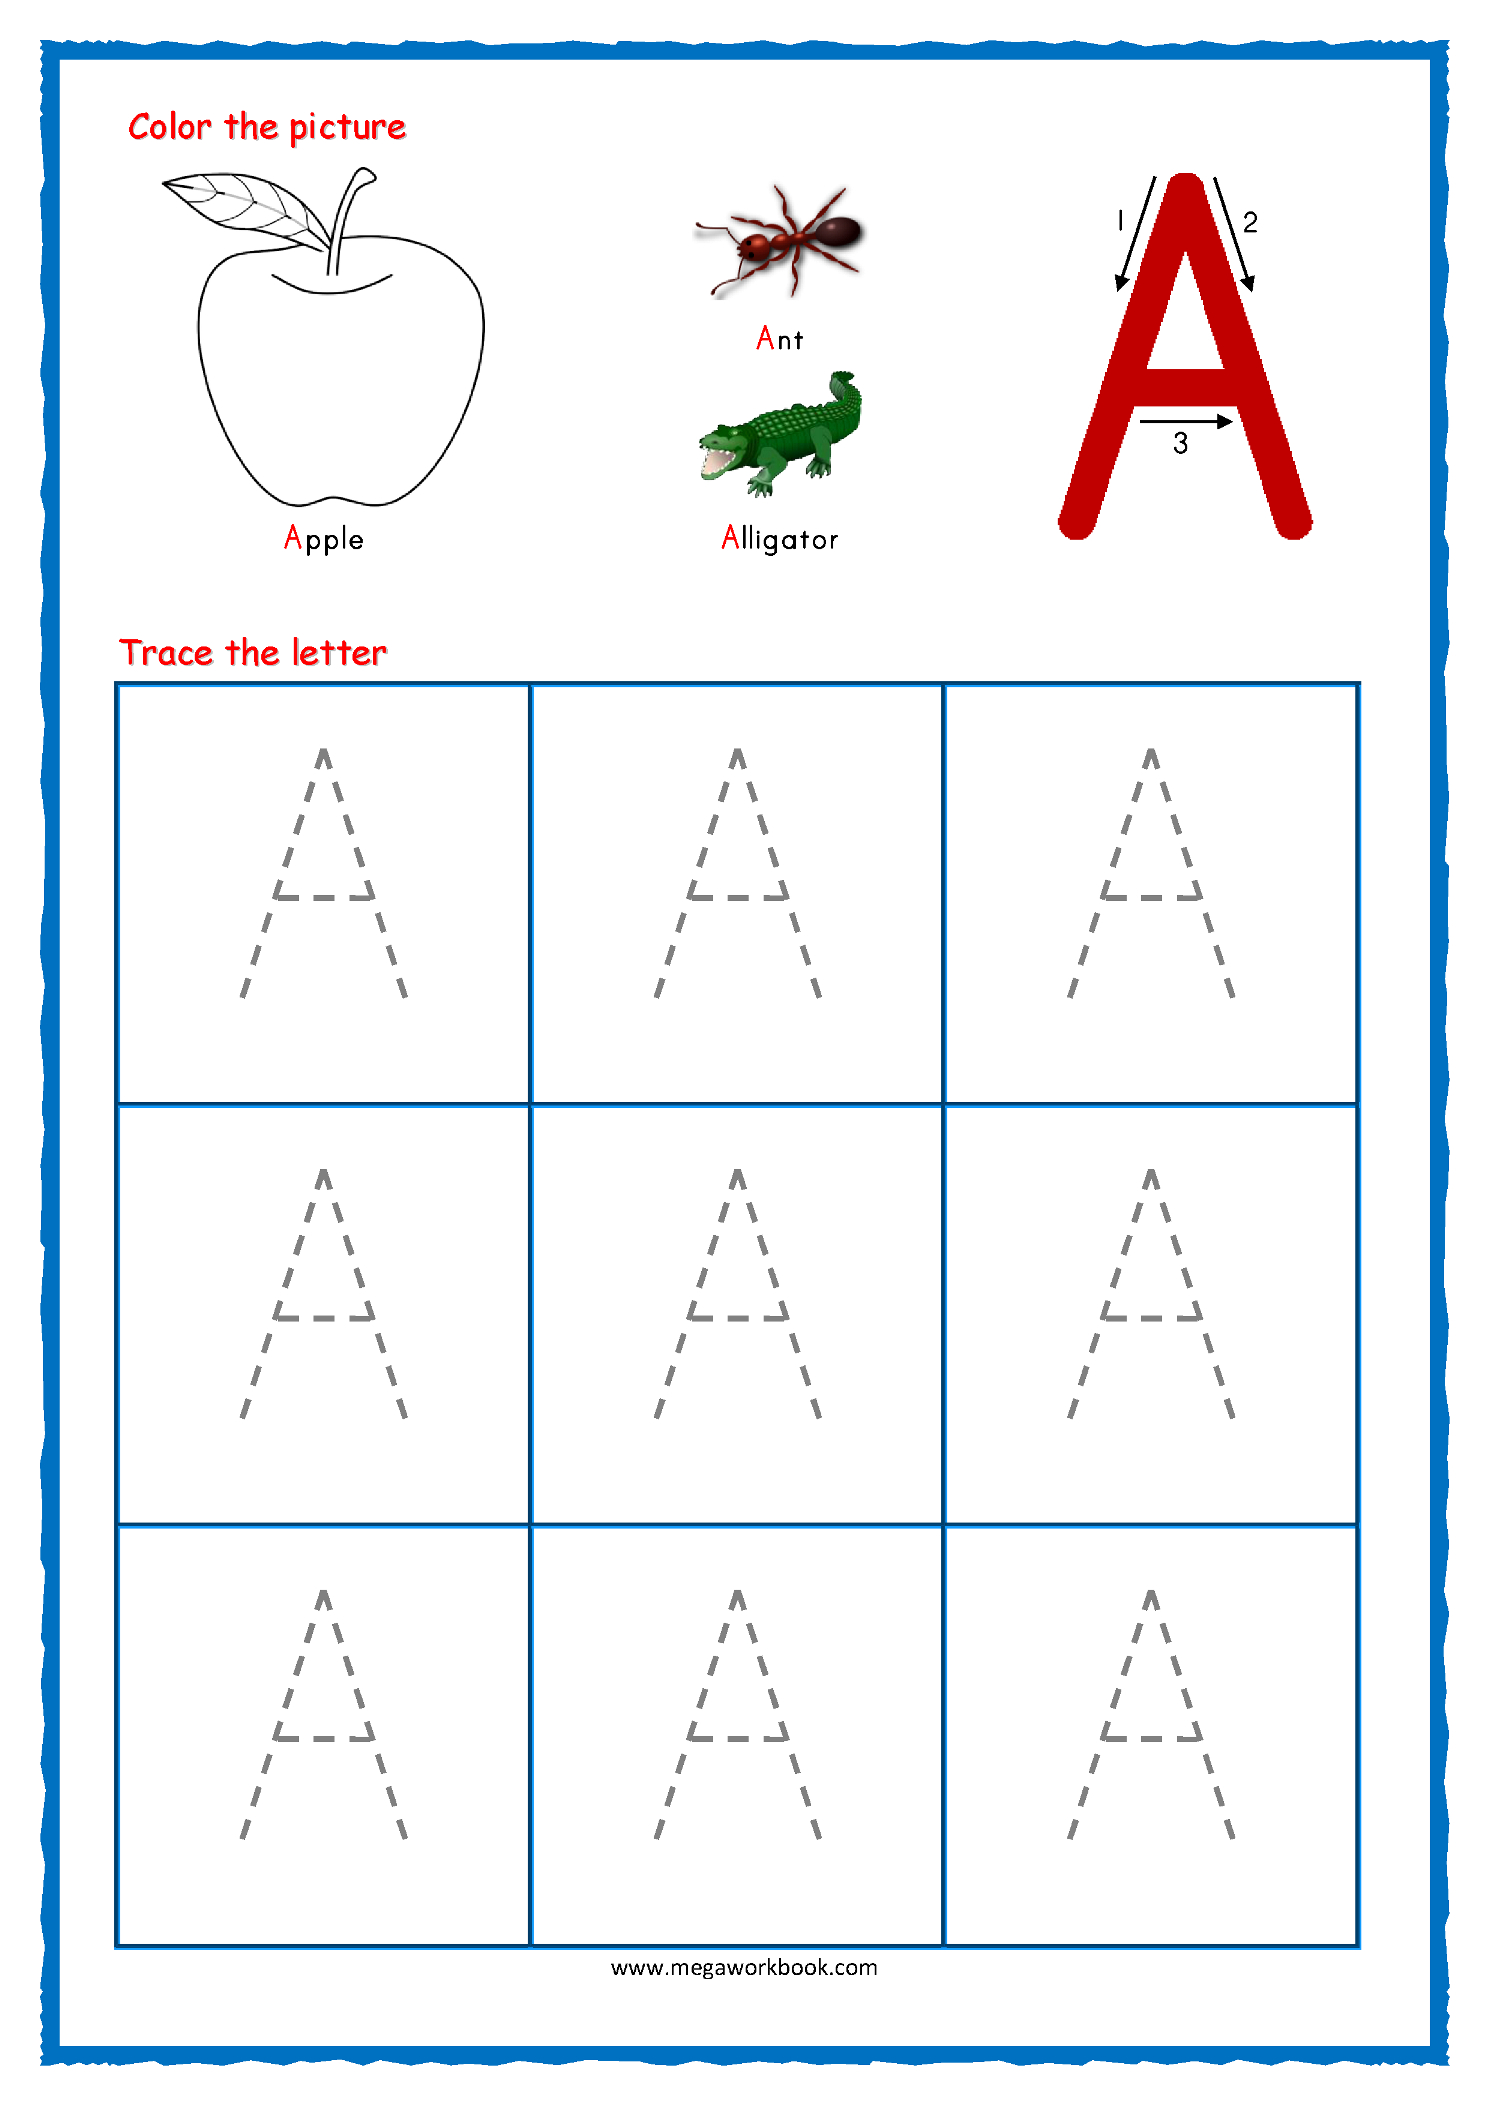 Coloring Book : Coloring Book Alphabet Tracing Worksheets in Tracing Letter A Worksheets Printable